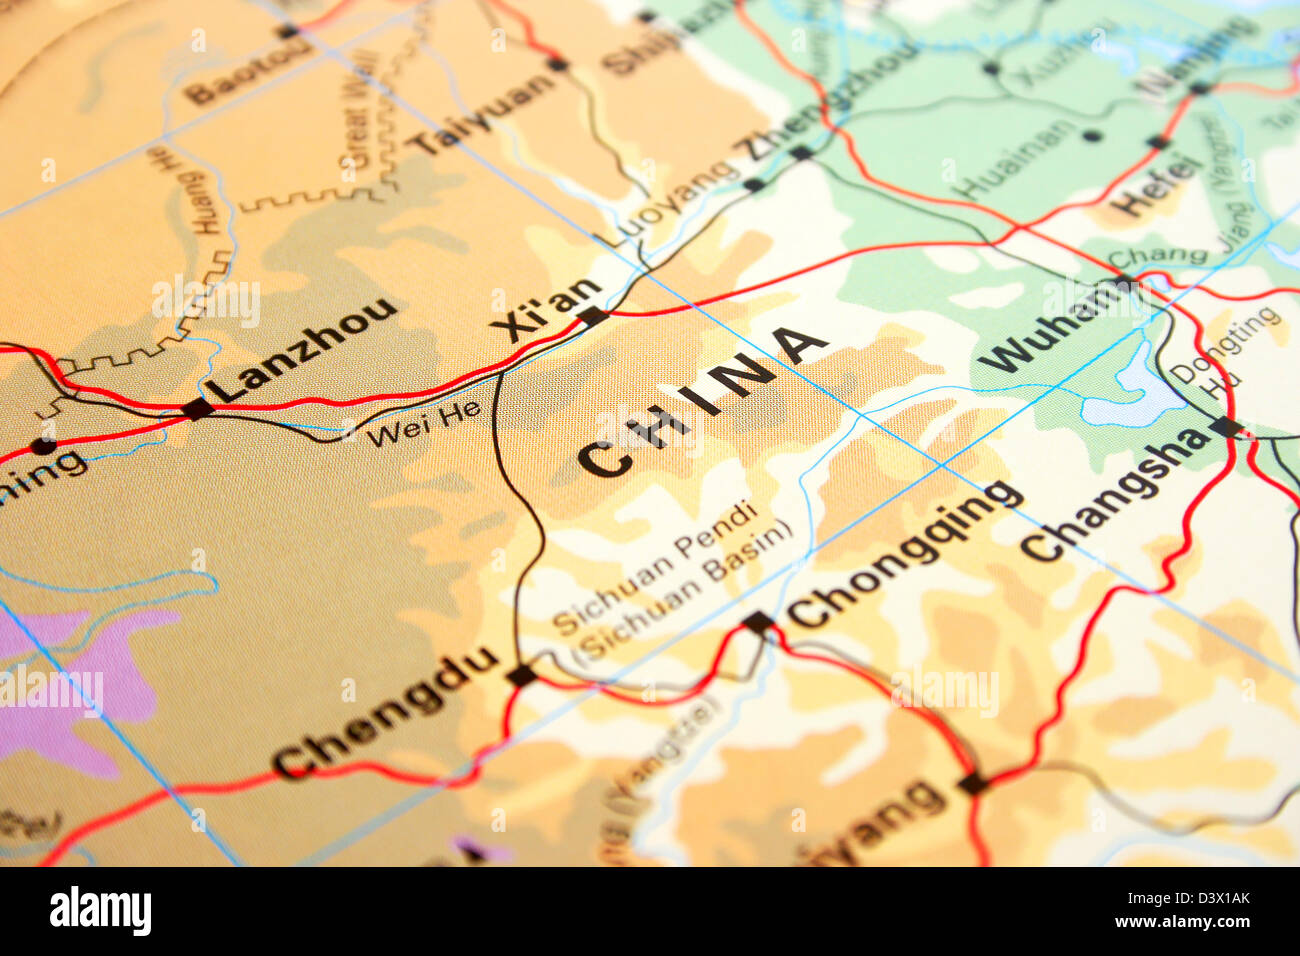 China Map With Mountains And Rivers Stock Photo Alamy